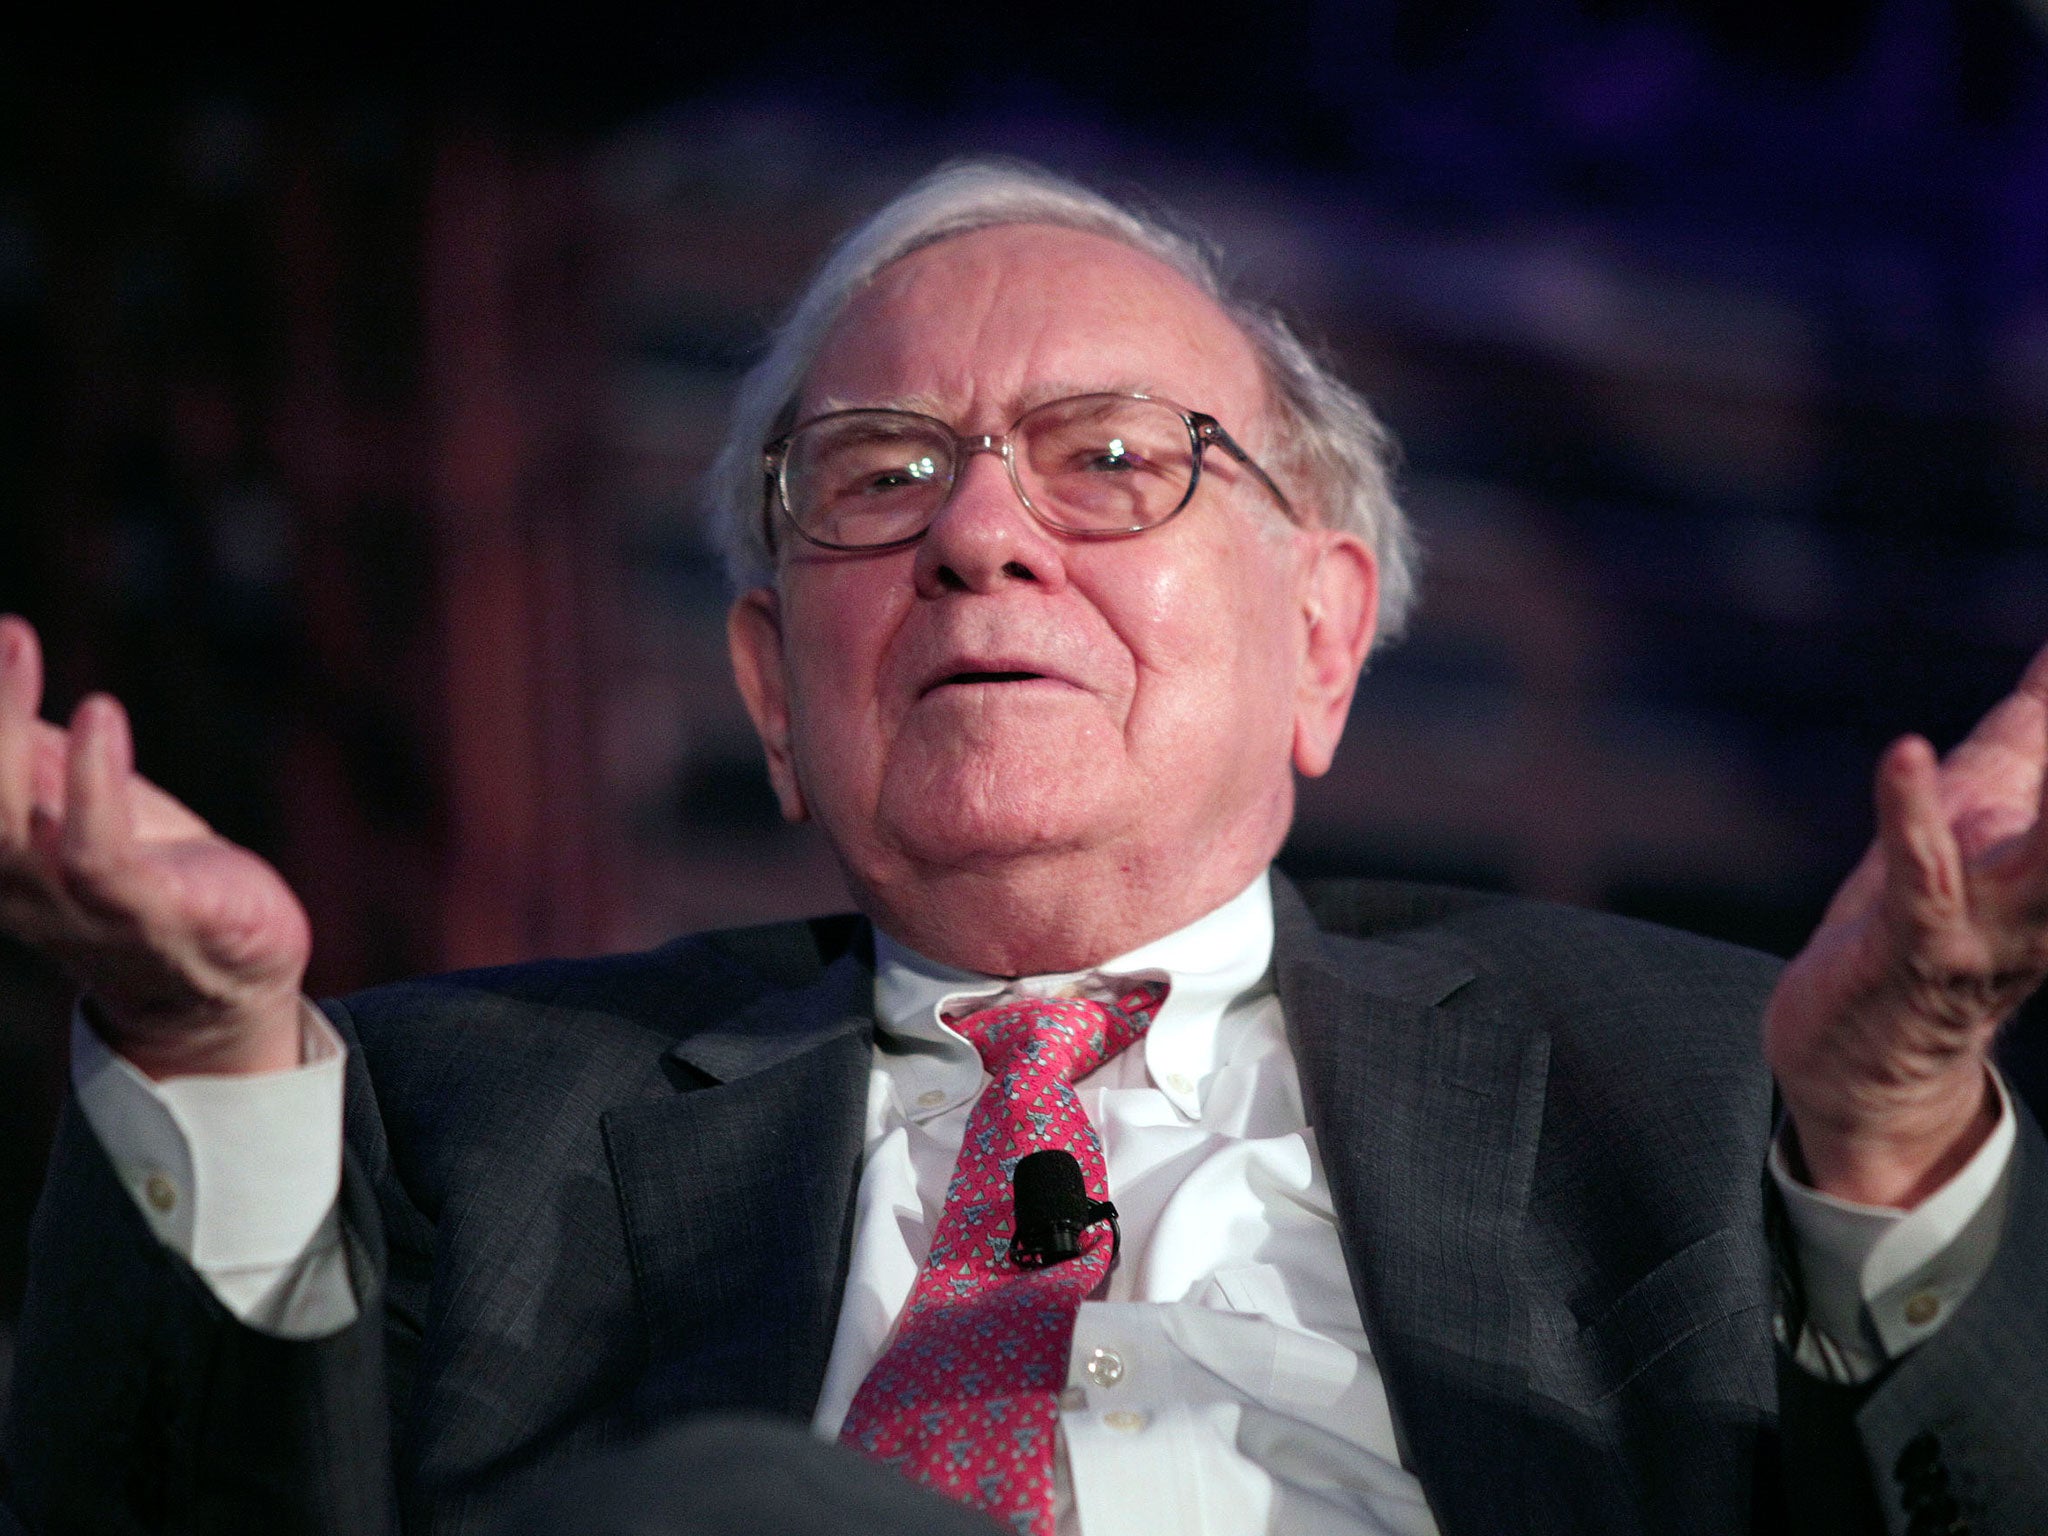 Warren Buffett has built a 4.1 per cent stake in the company through his Berkshire Hathaway vehicle over the past seven years